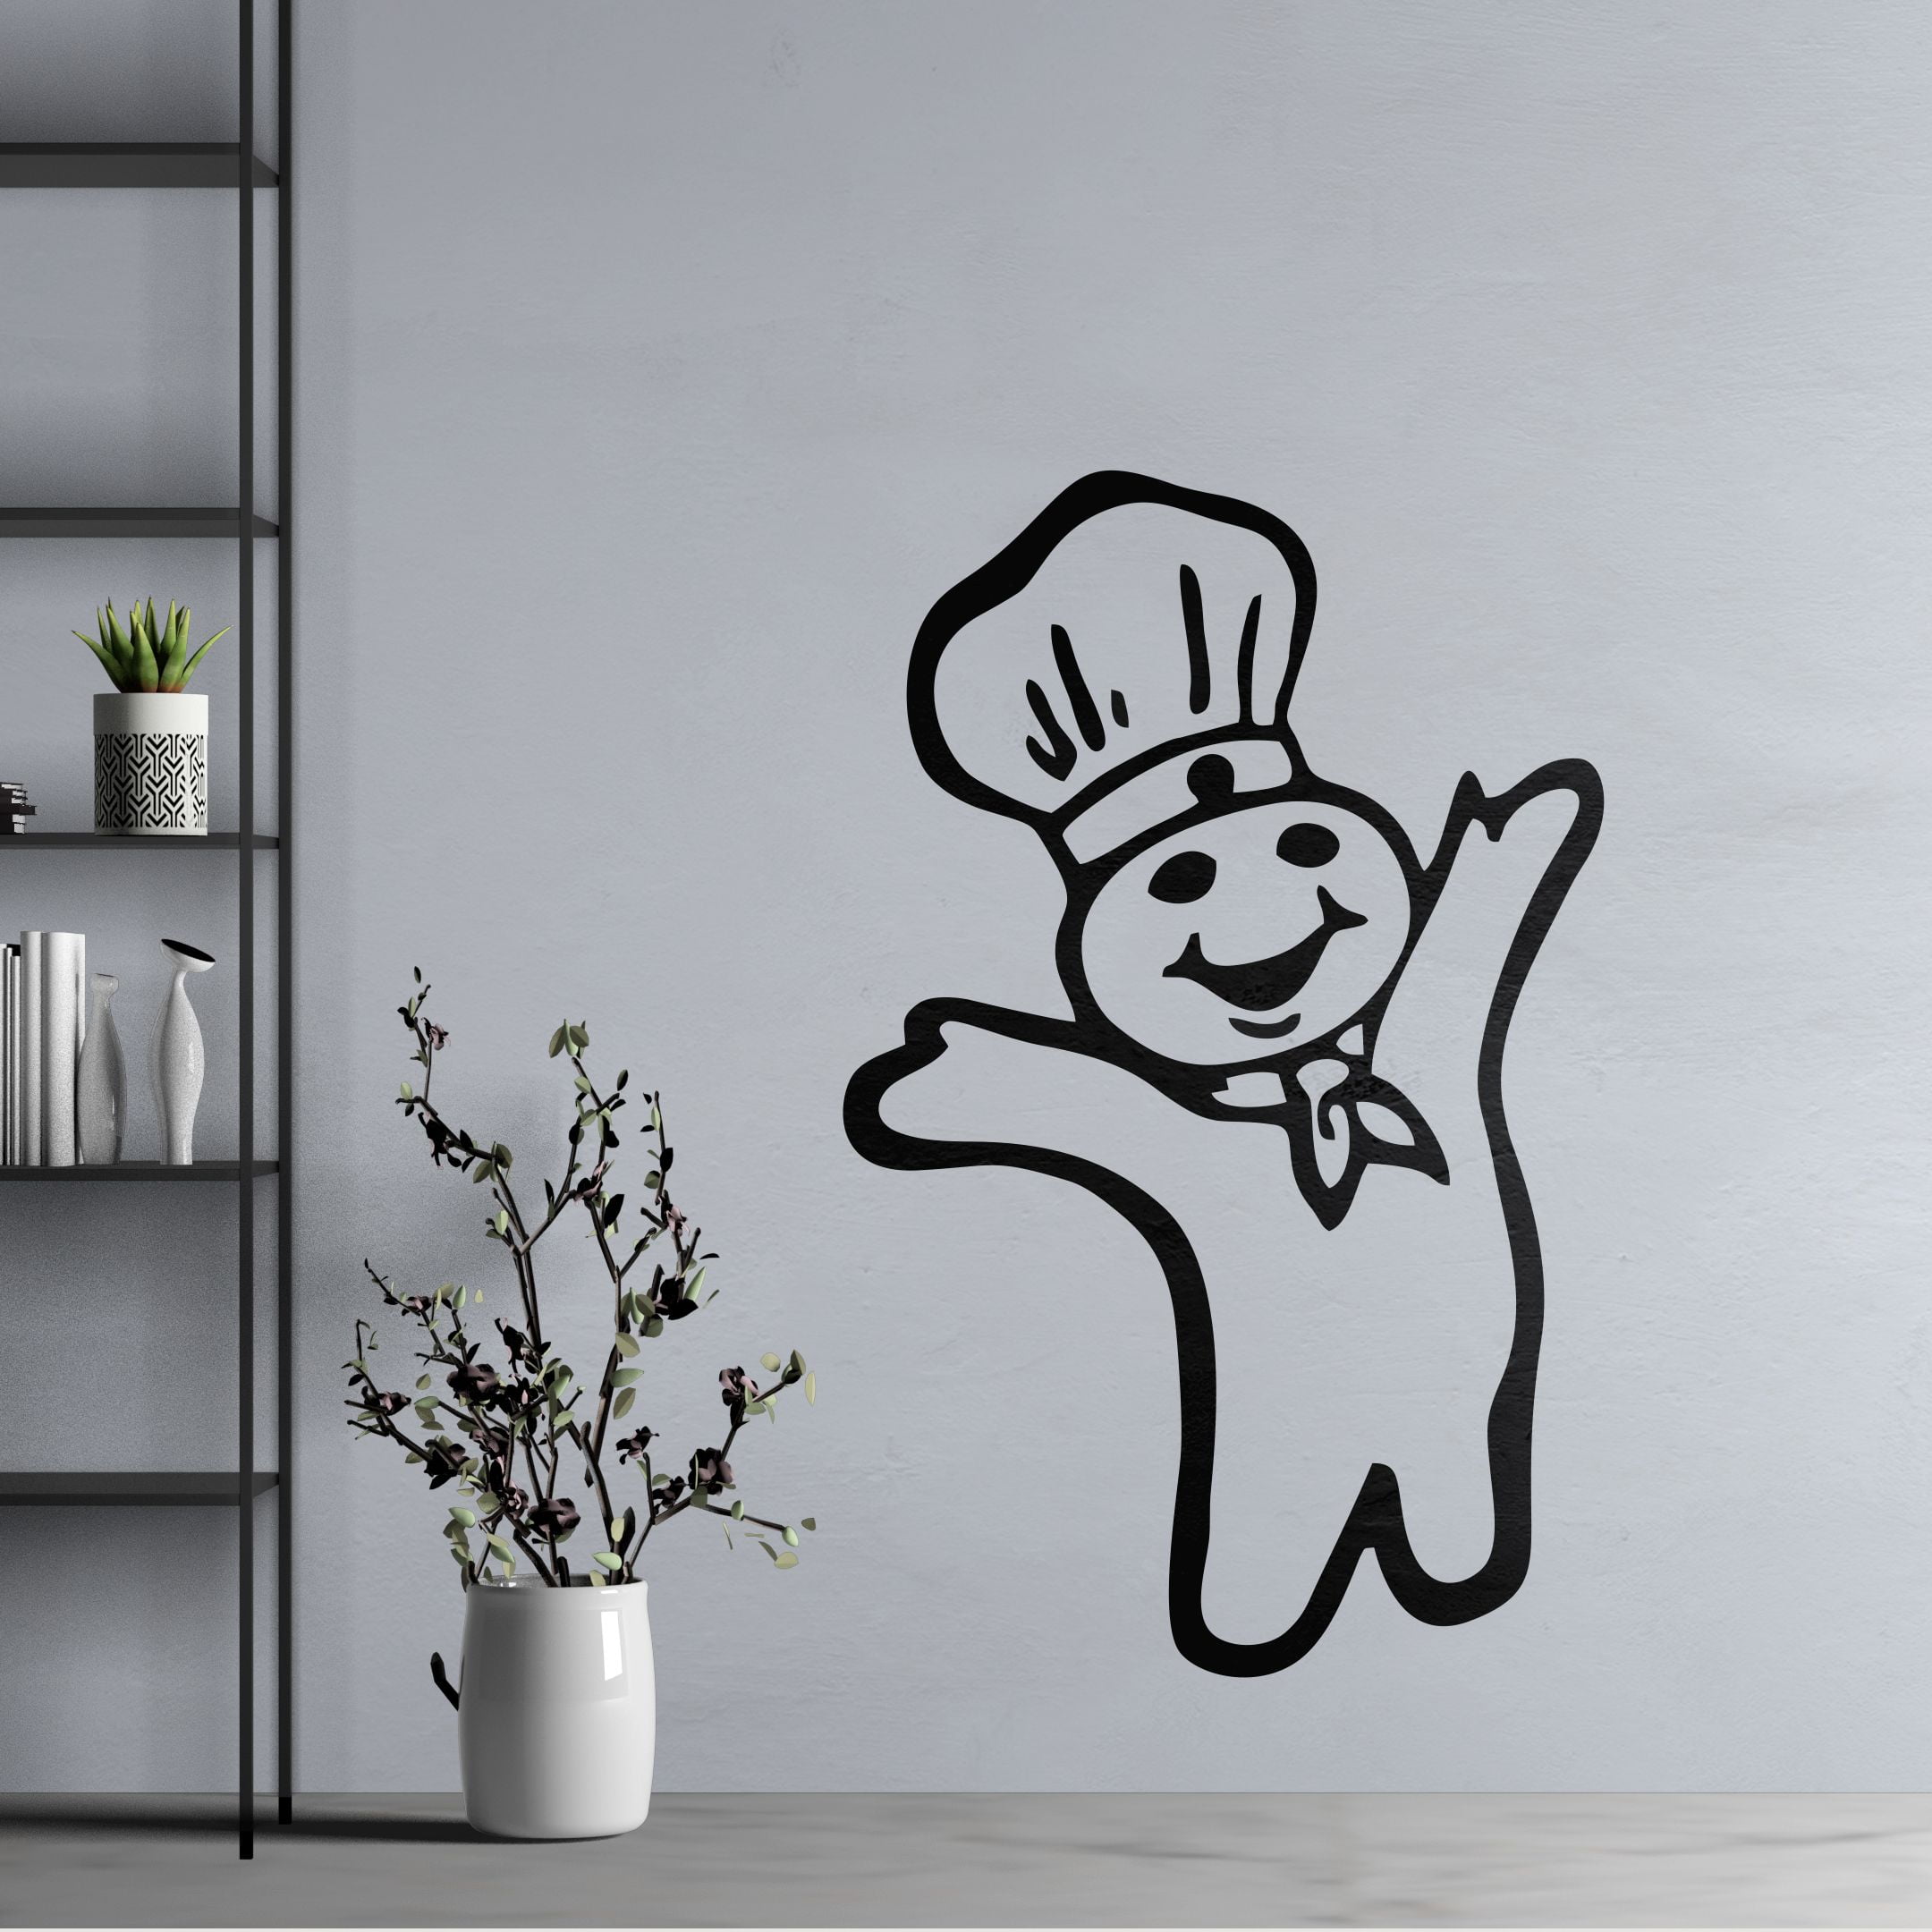 Door /Tile Art Decal Sticker NEW Chef Carrying Food 18”x12” Black Kitchen Wall 